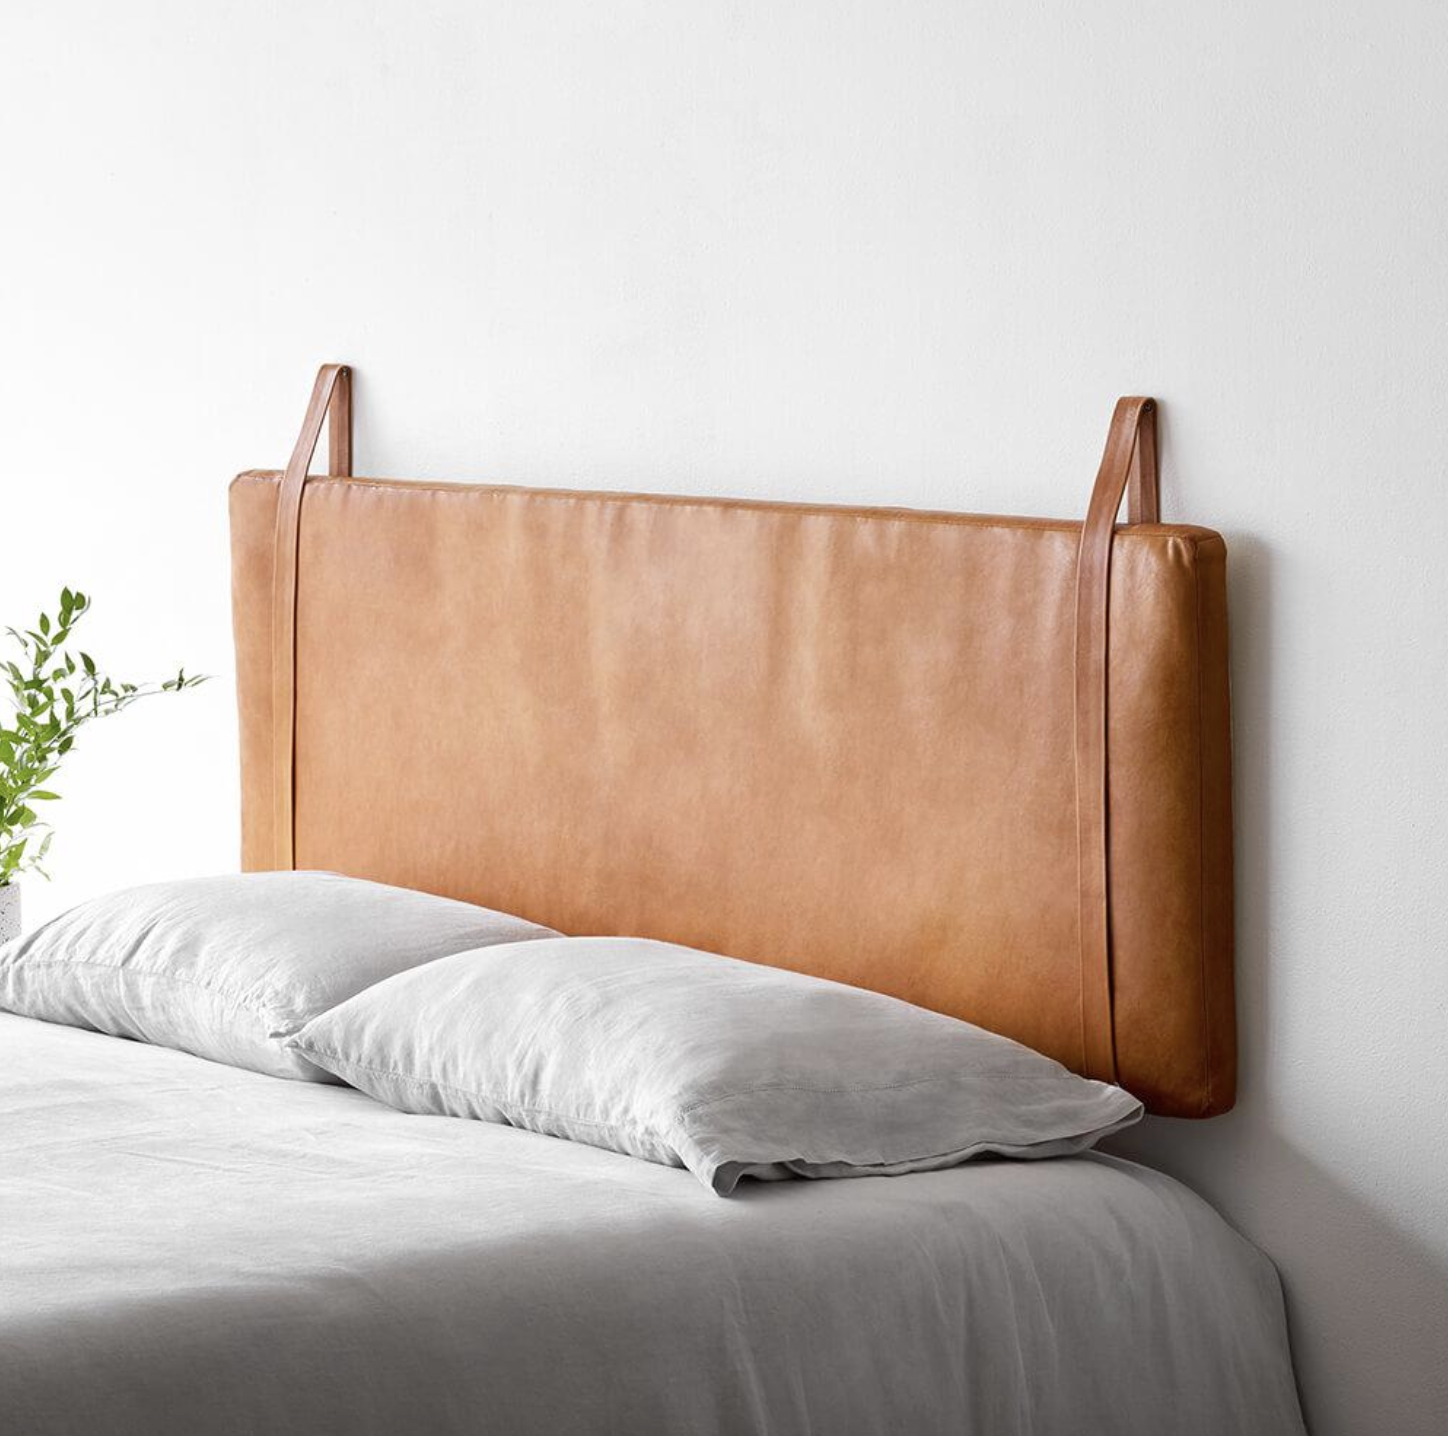 9 Wall Mounted Floating Headboards We Absolutely Love In 2022 - How To Attach Headboard Wall Without Holes